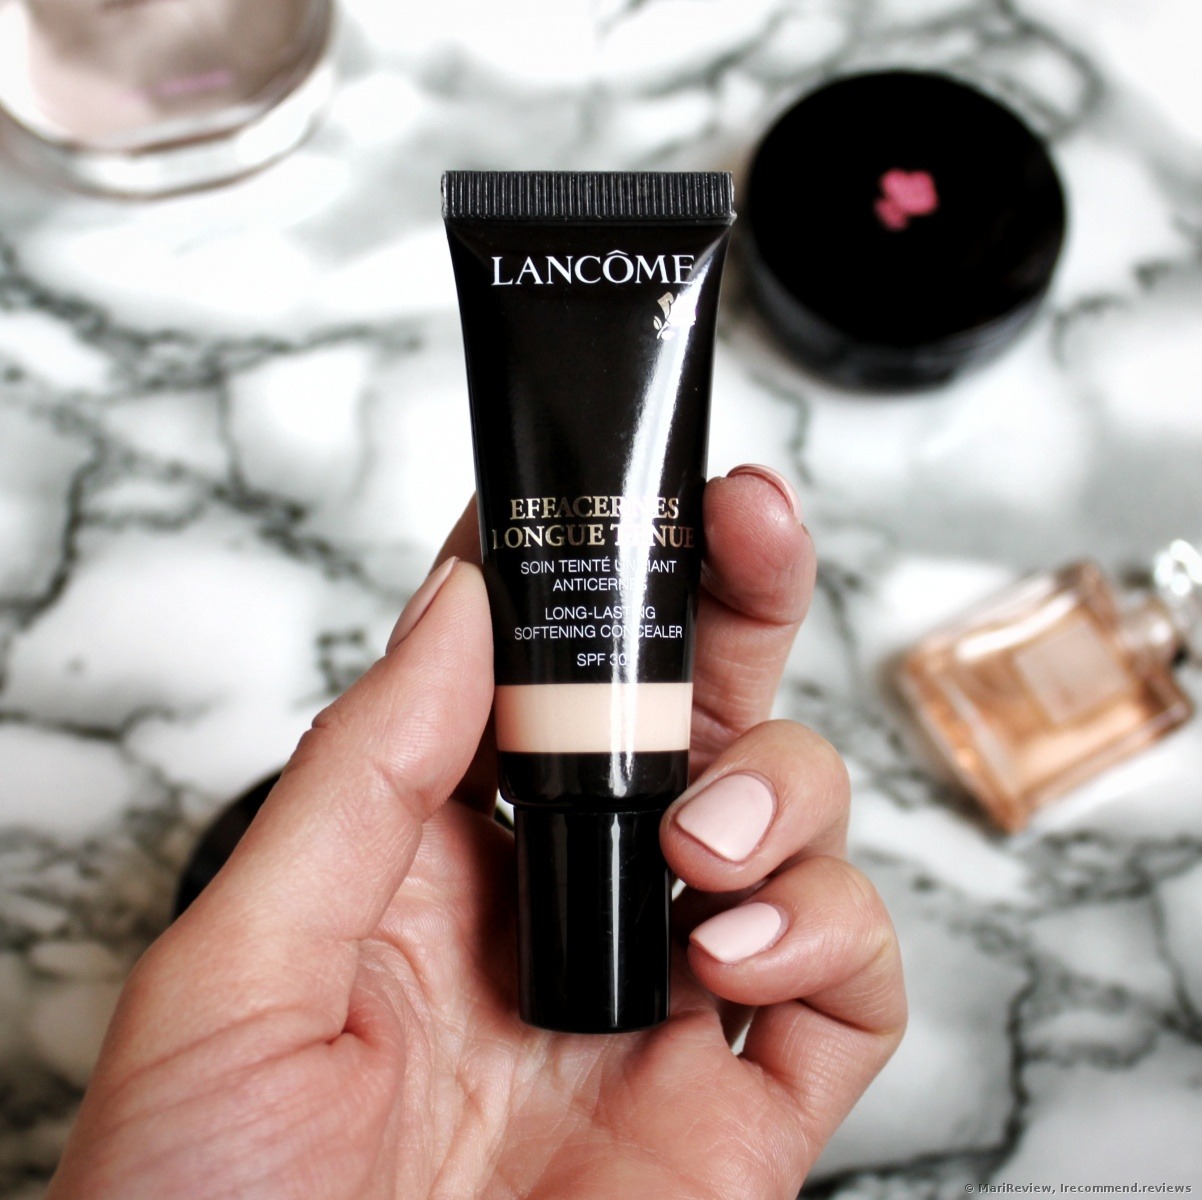 Lancome Longue Tenue Long Lasting Softening SPF30 Concealer - «I've finally found a perfect concealer! The wear time is great. Plus it has SPF and goes a really long way. I've